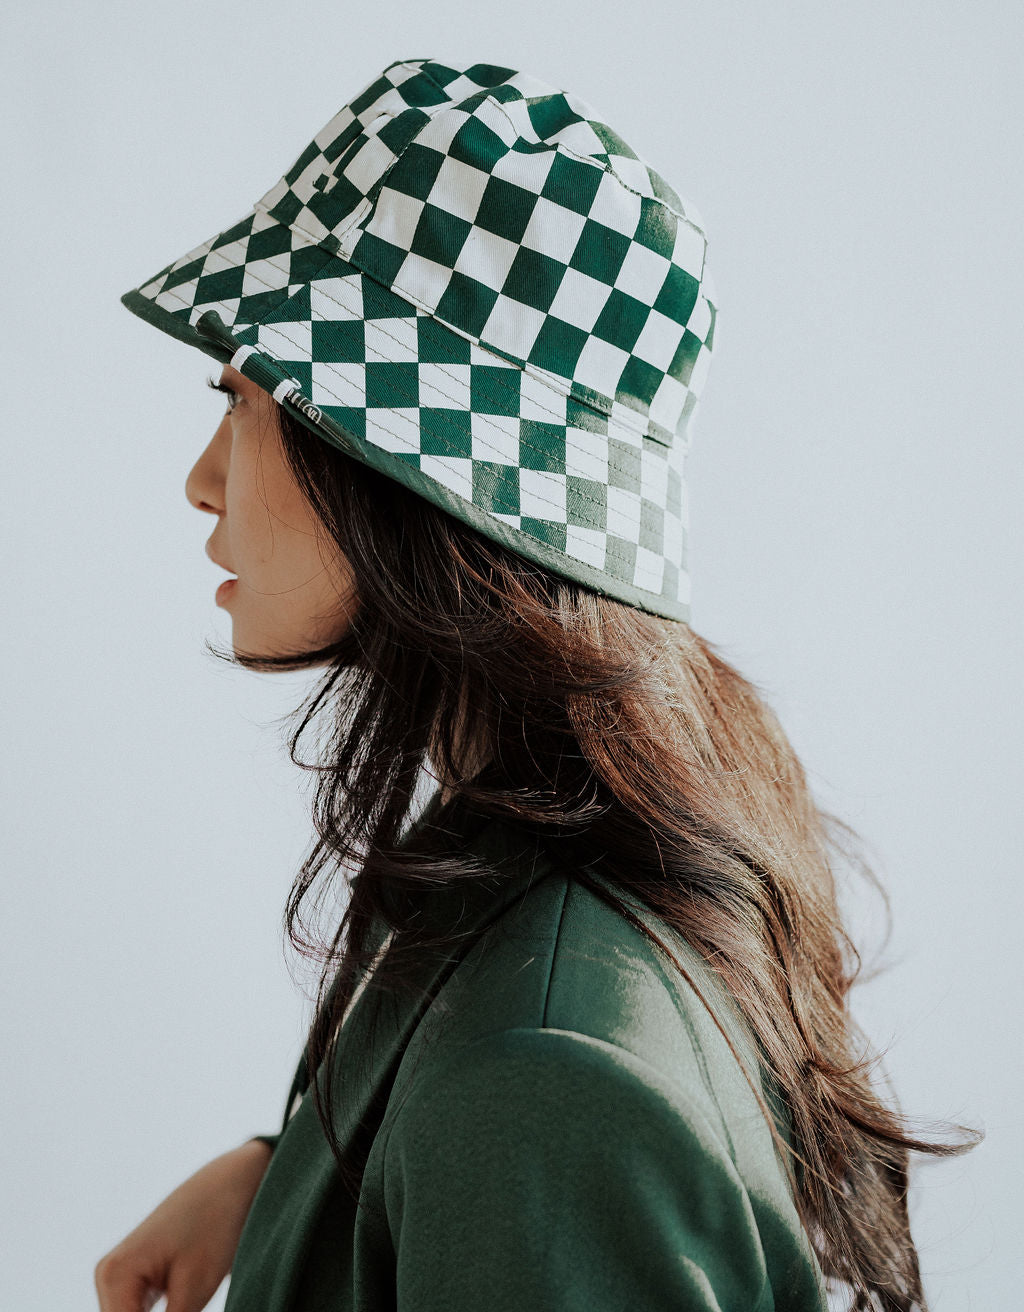 Rains® Bucket Hat in Green for $37